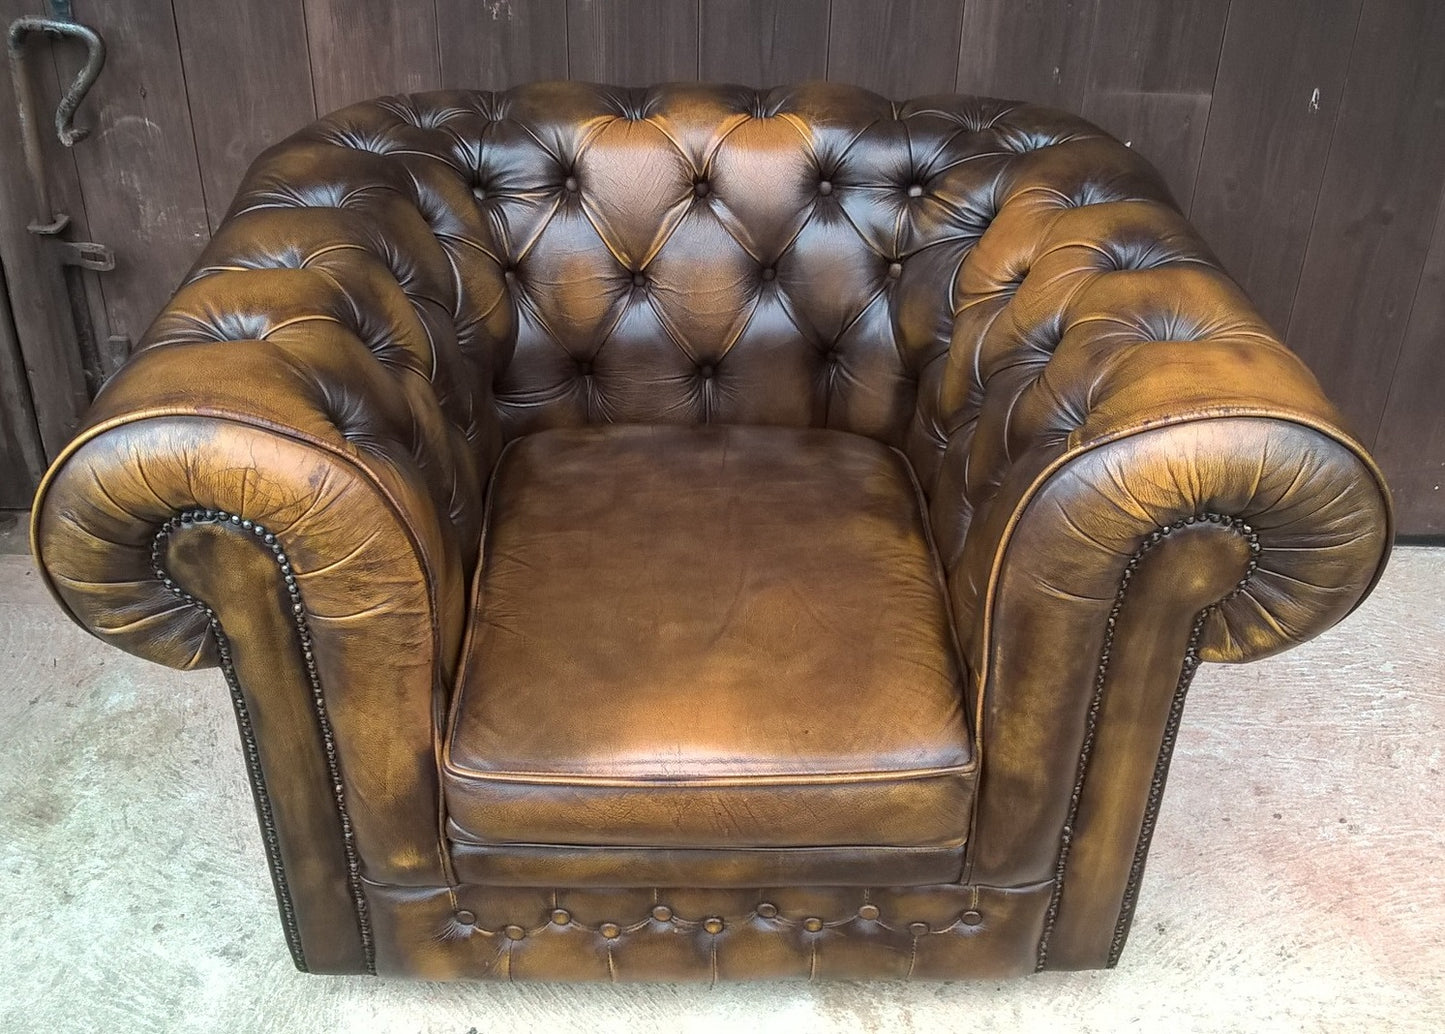 Gorgeous Pair Of Leather Chesterfield Club Chairs Made By Thomas Lloyd